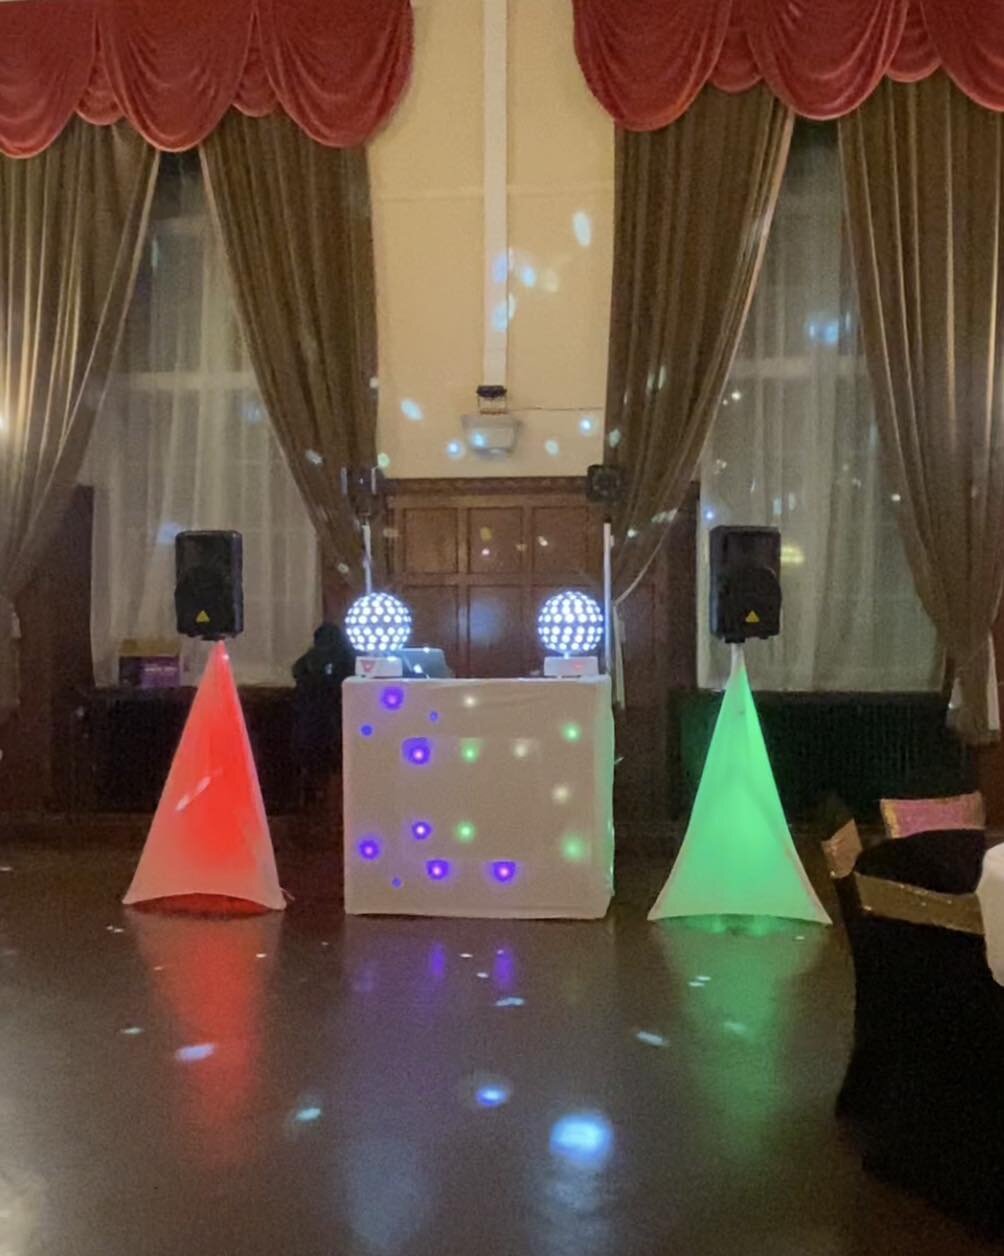 Super super excited to be down at the beautiful St Augustine&rsquo;s for the first of many awesome Christmas party nights! 

#christmas #kentpartydj #exclusivesoundsUK